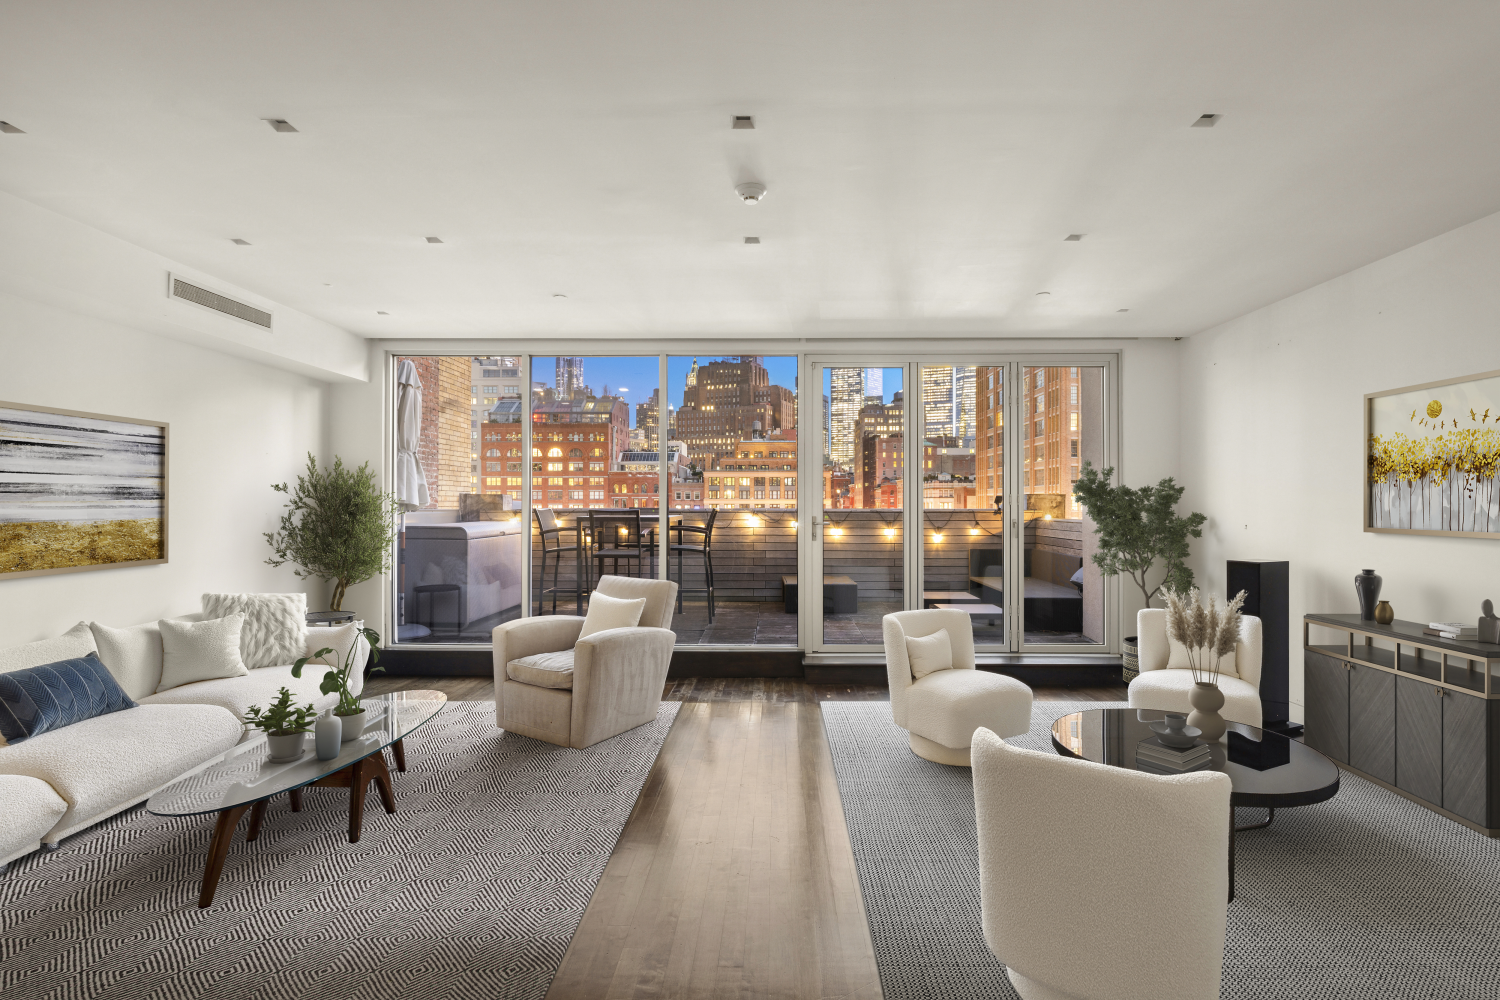 46 Laight Street Penthouse, Tribeca, Downtown, NYC - 4 Bedrooms  
4.5 Bathrooms  
10 Rooms - 